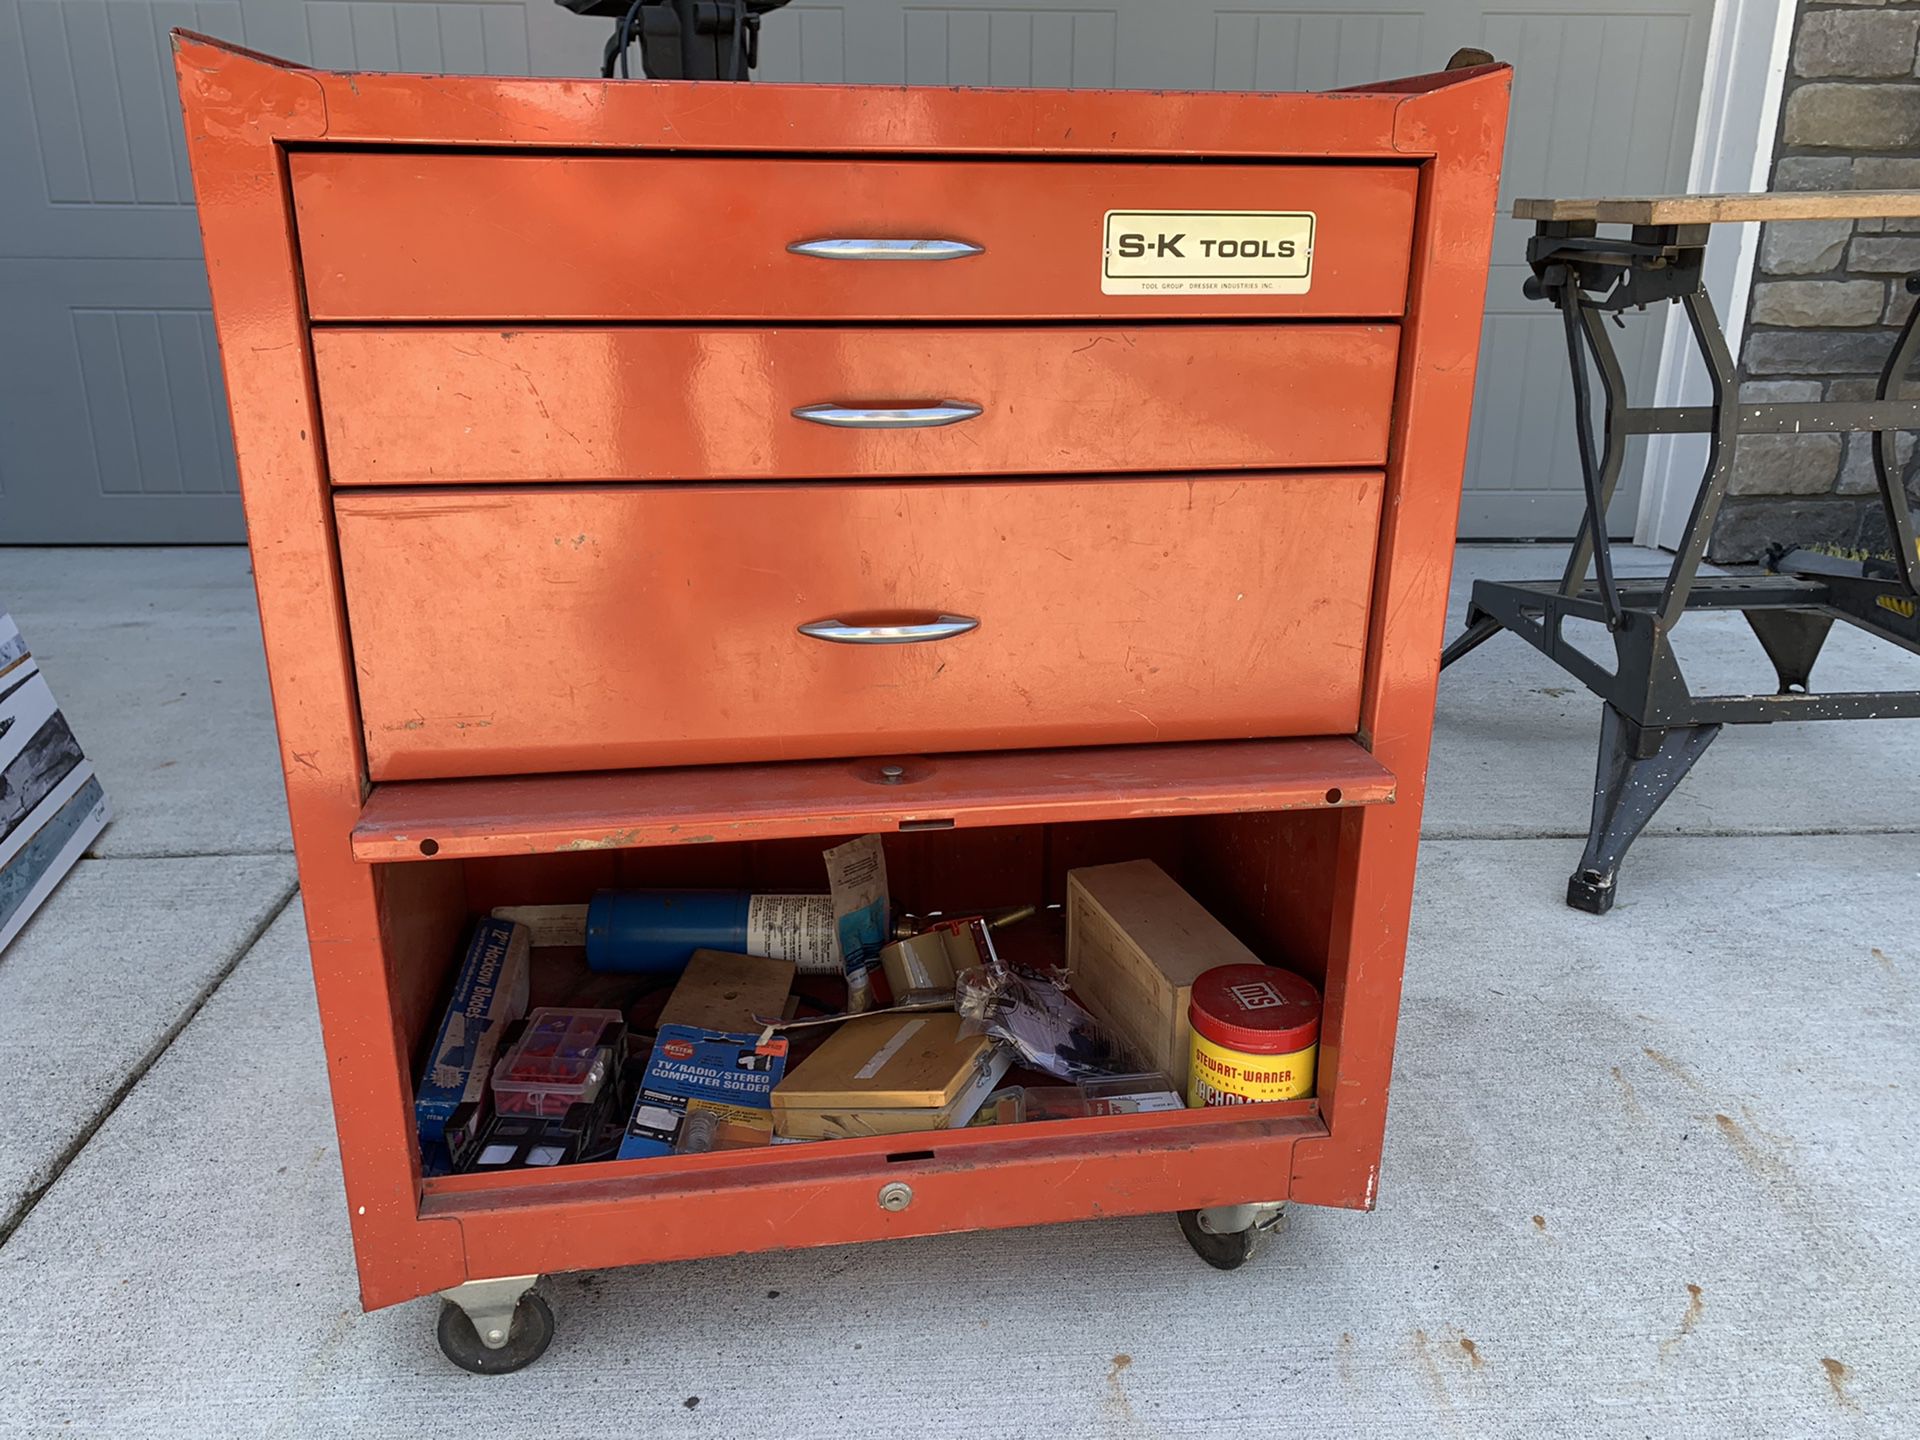 S-K tool chest w tools included